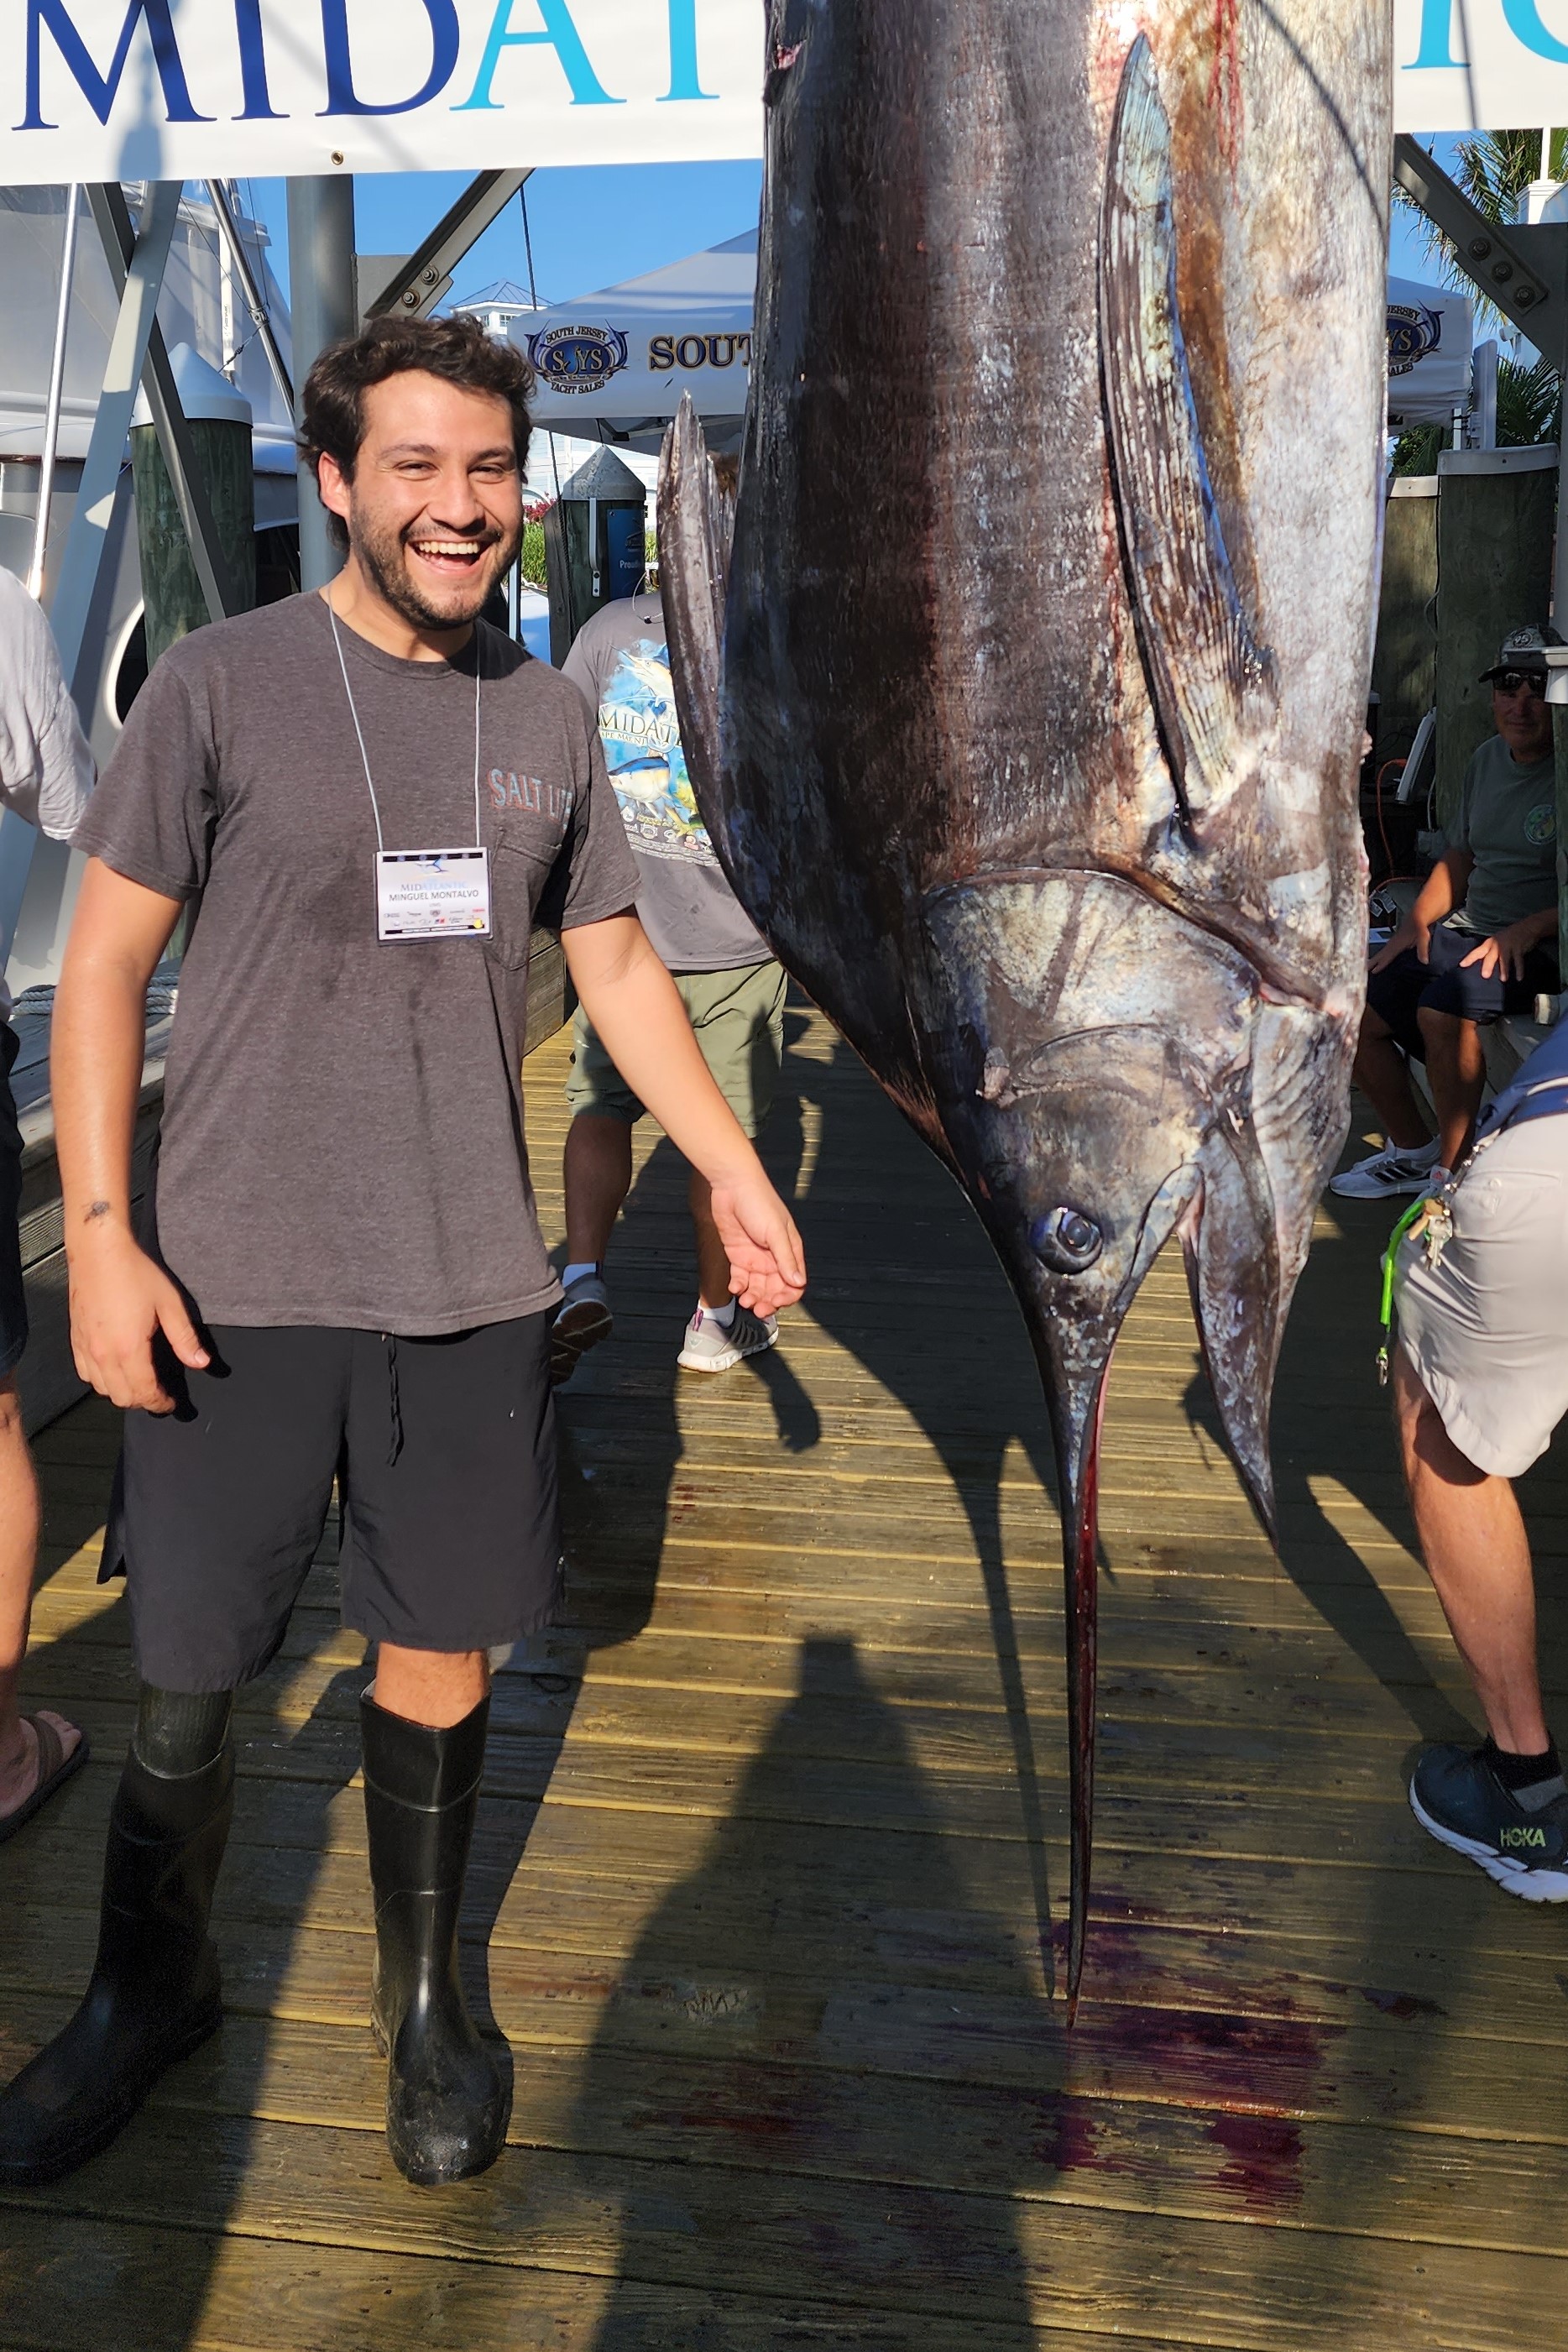 This is me at a fishing tournament with an enormous Atlantic Blue Marlin - this was my first time seeing a fish of this size! We collect data from tournaments like this to help us assess the health of fish stocks. Some of these fishes are sometimes donated to us and become part of the Nunnally Ichthyology Collection that houses specimens that can be used by researchers all over the world.